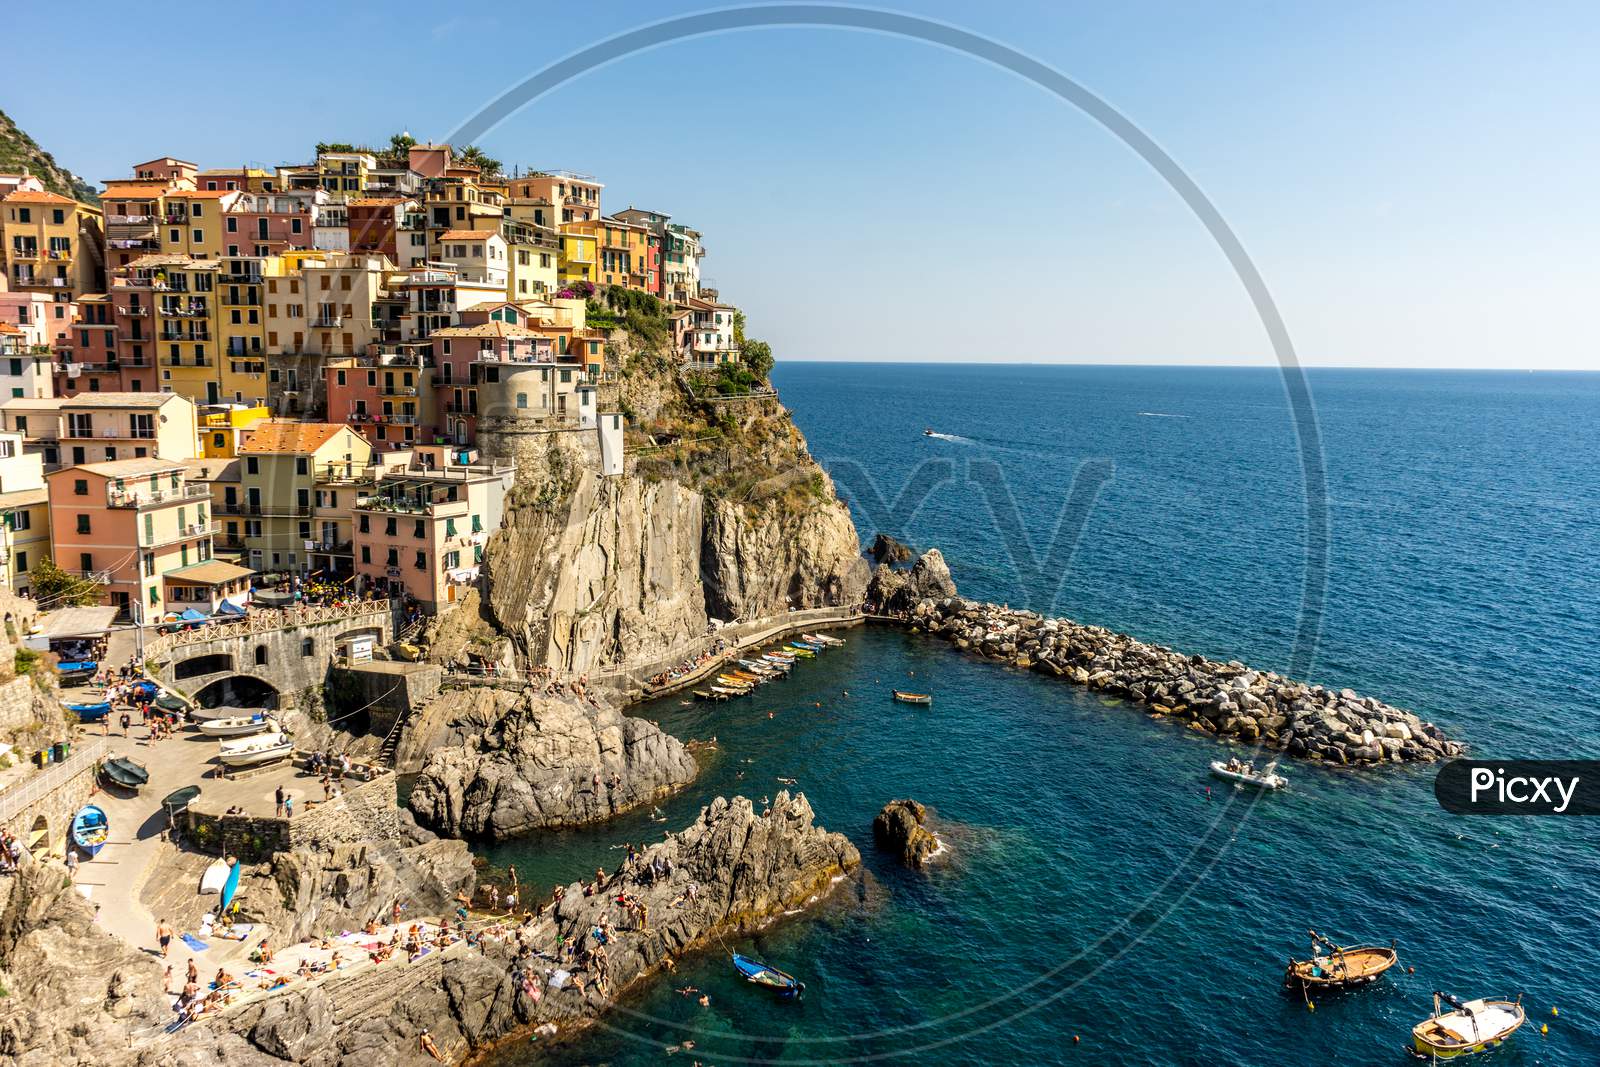 Italy, Cinque Terre, Manarola, Manarola, Panoramic View Of Sea And Buildings Against Clear Blue Sky